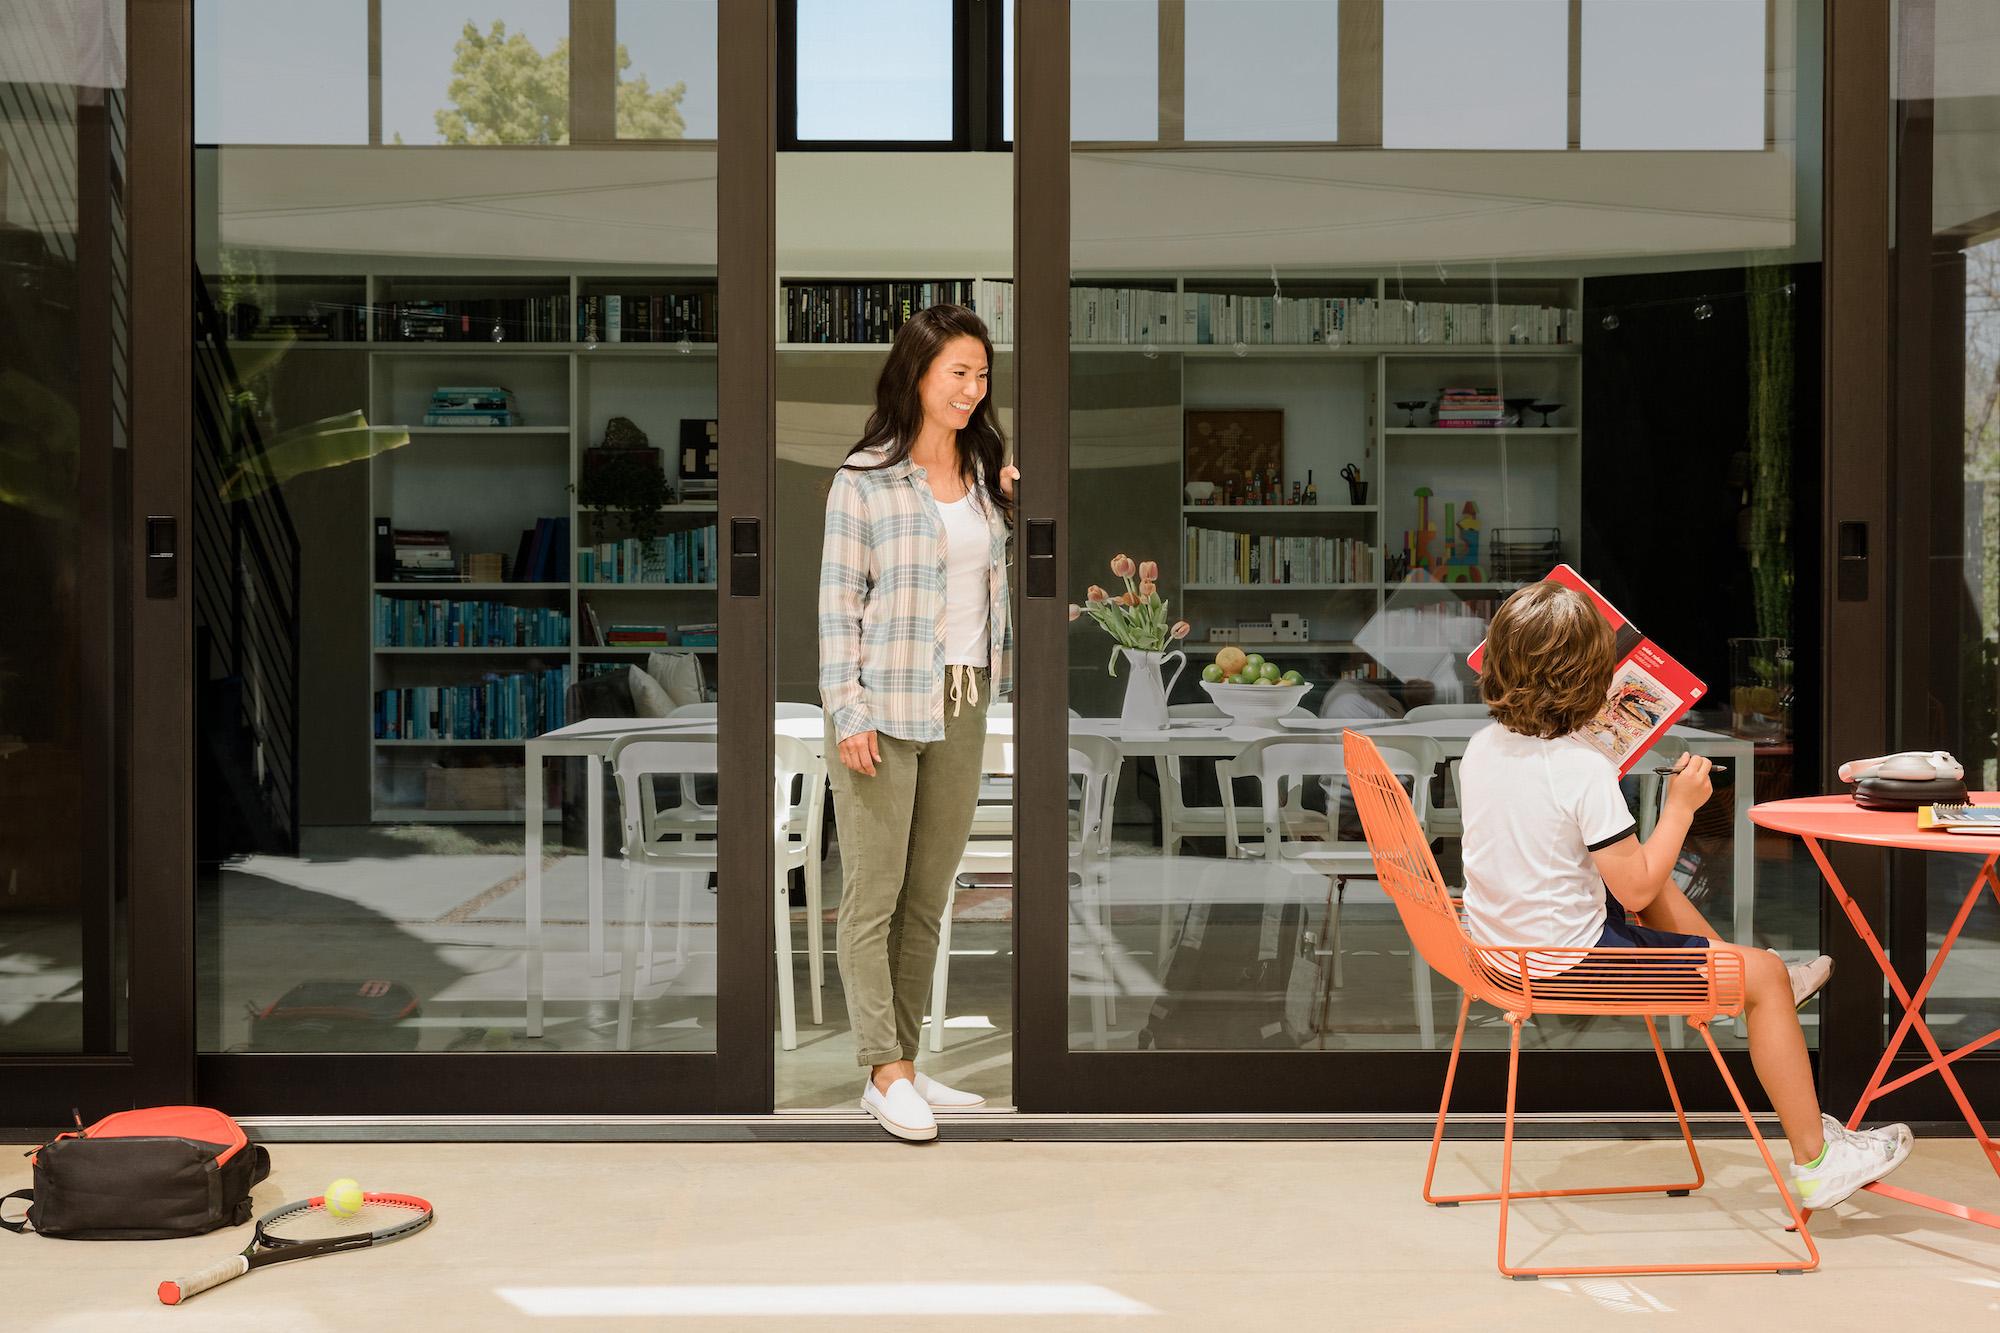 Yohana CEO stands between open glass doors looking out at a child on the patio, holding a book